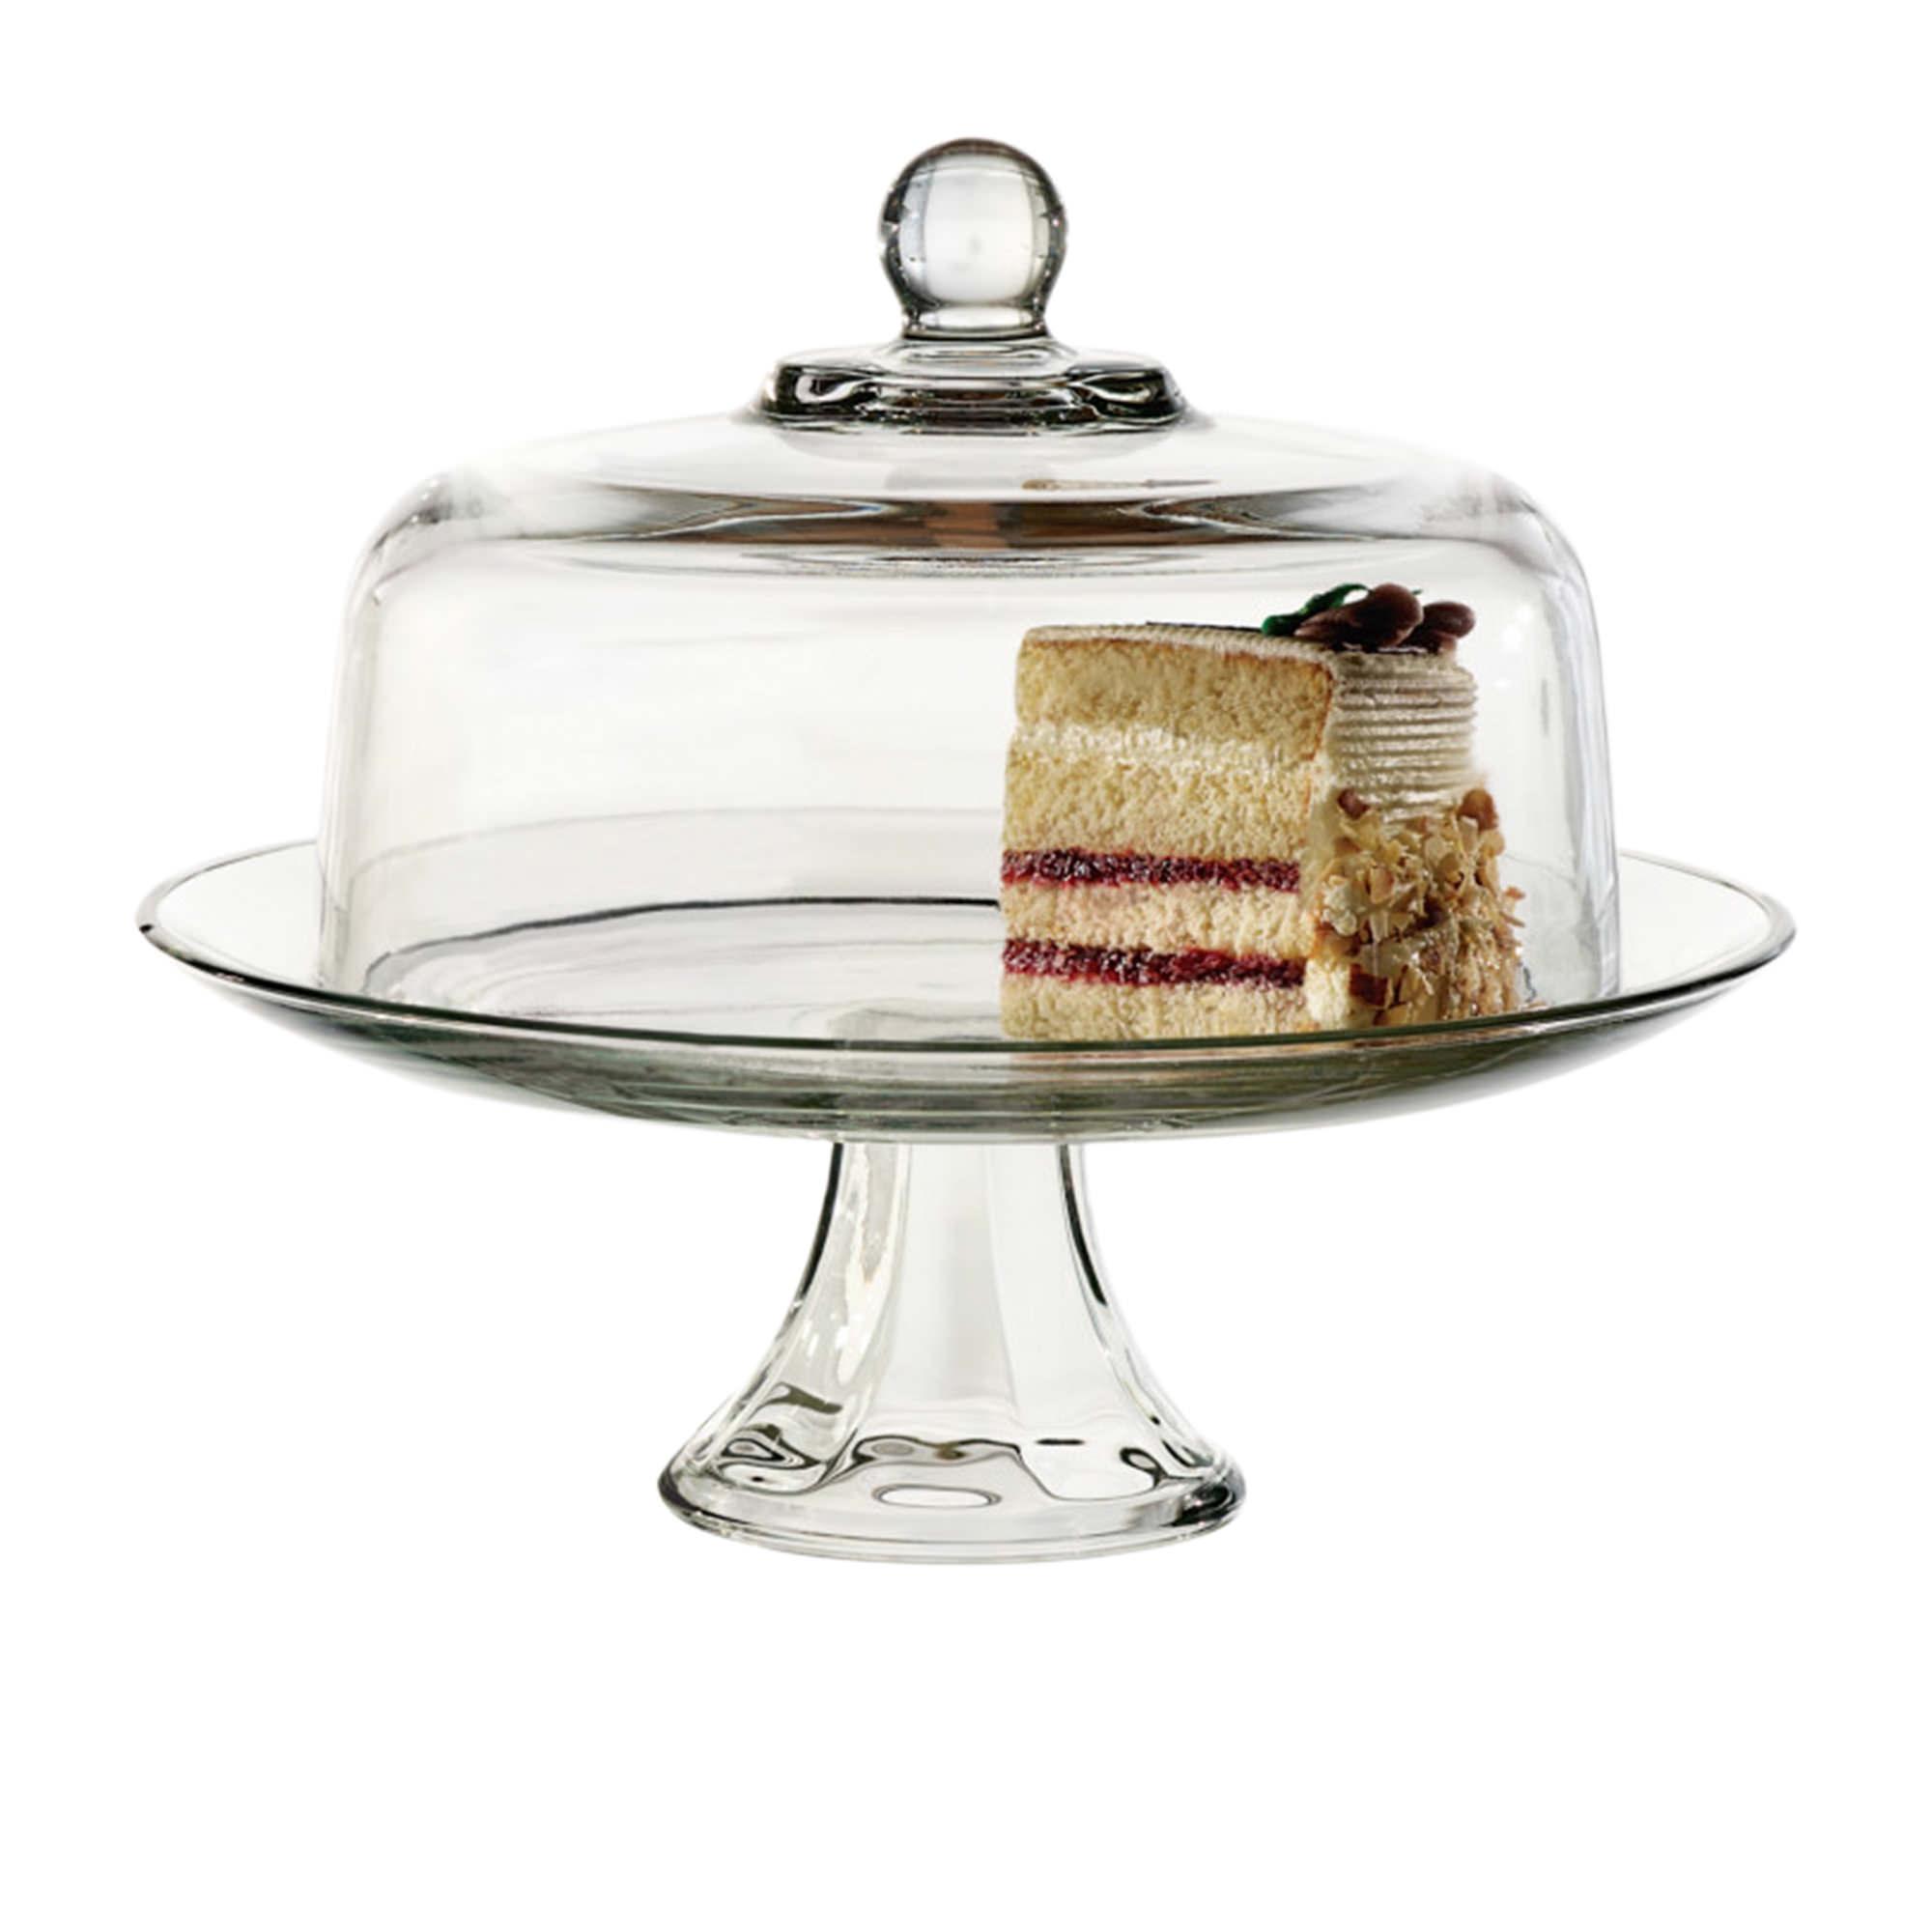 Anchor Hocking Presence Cake Stand & Dome 33cm Image 2